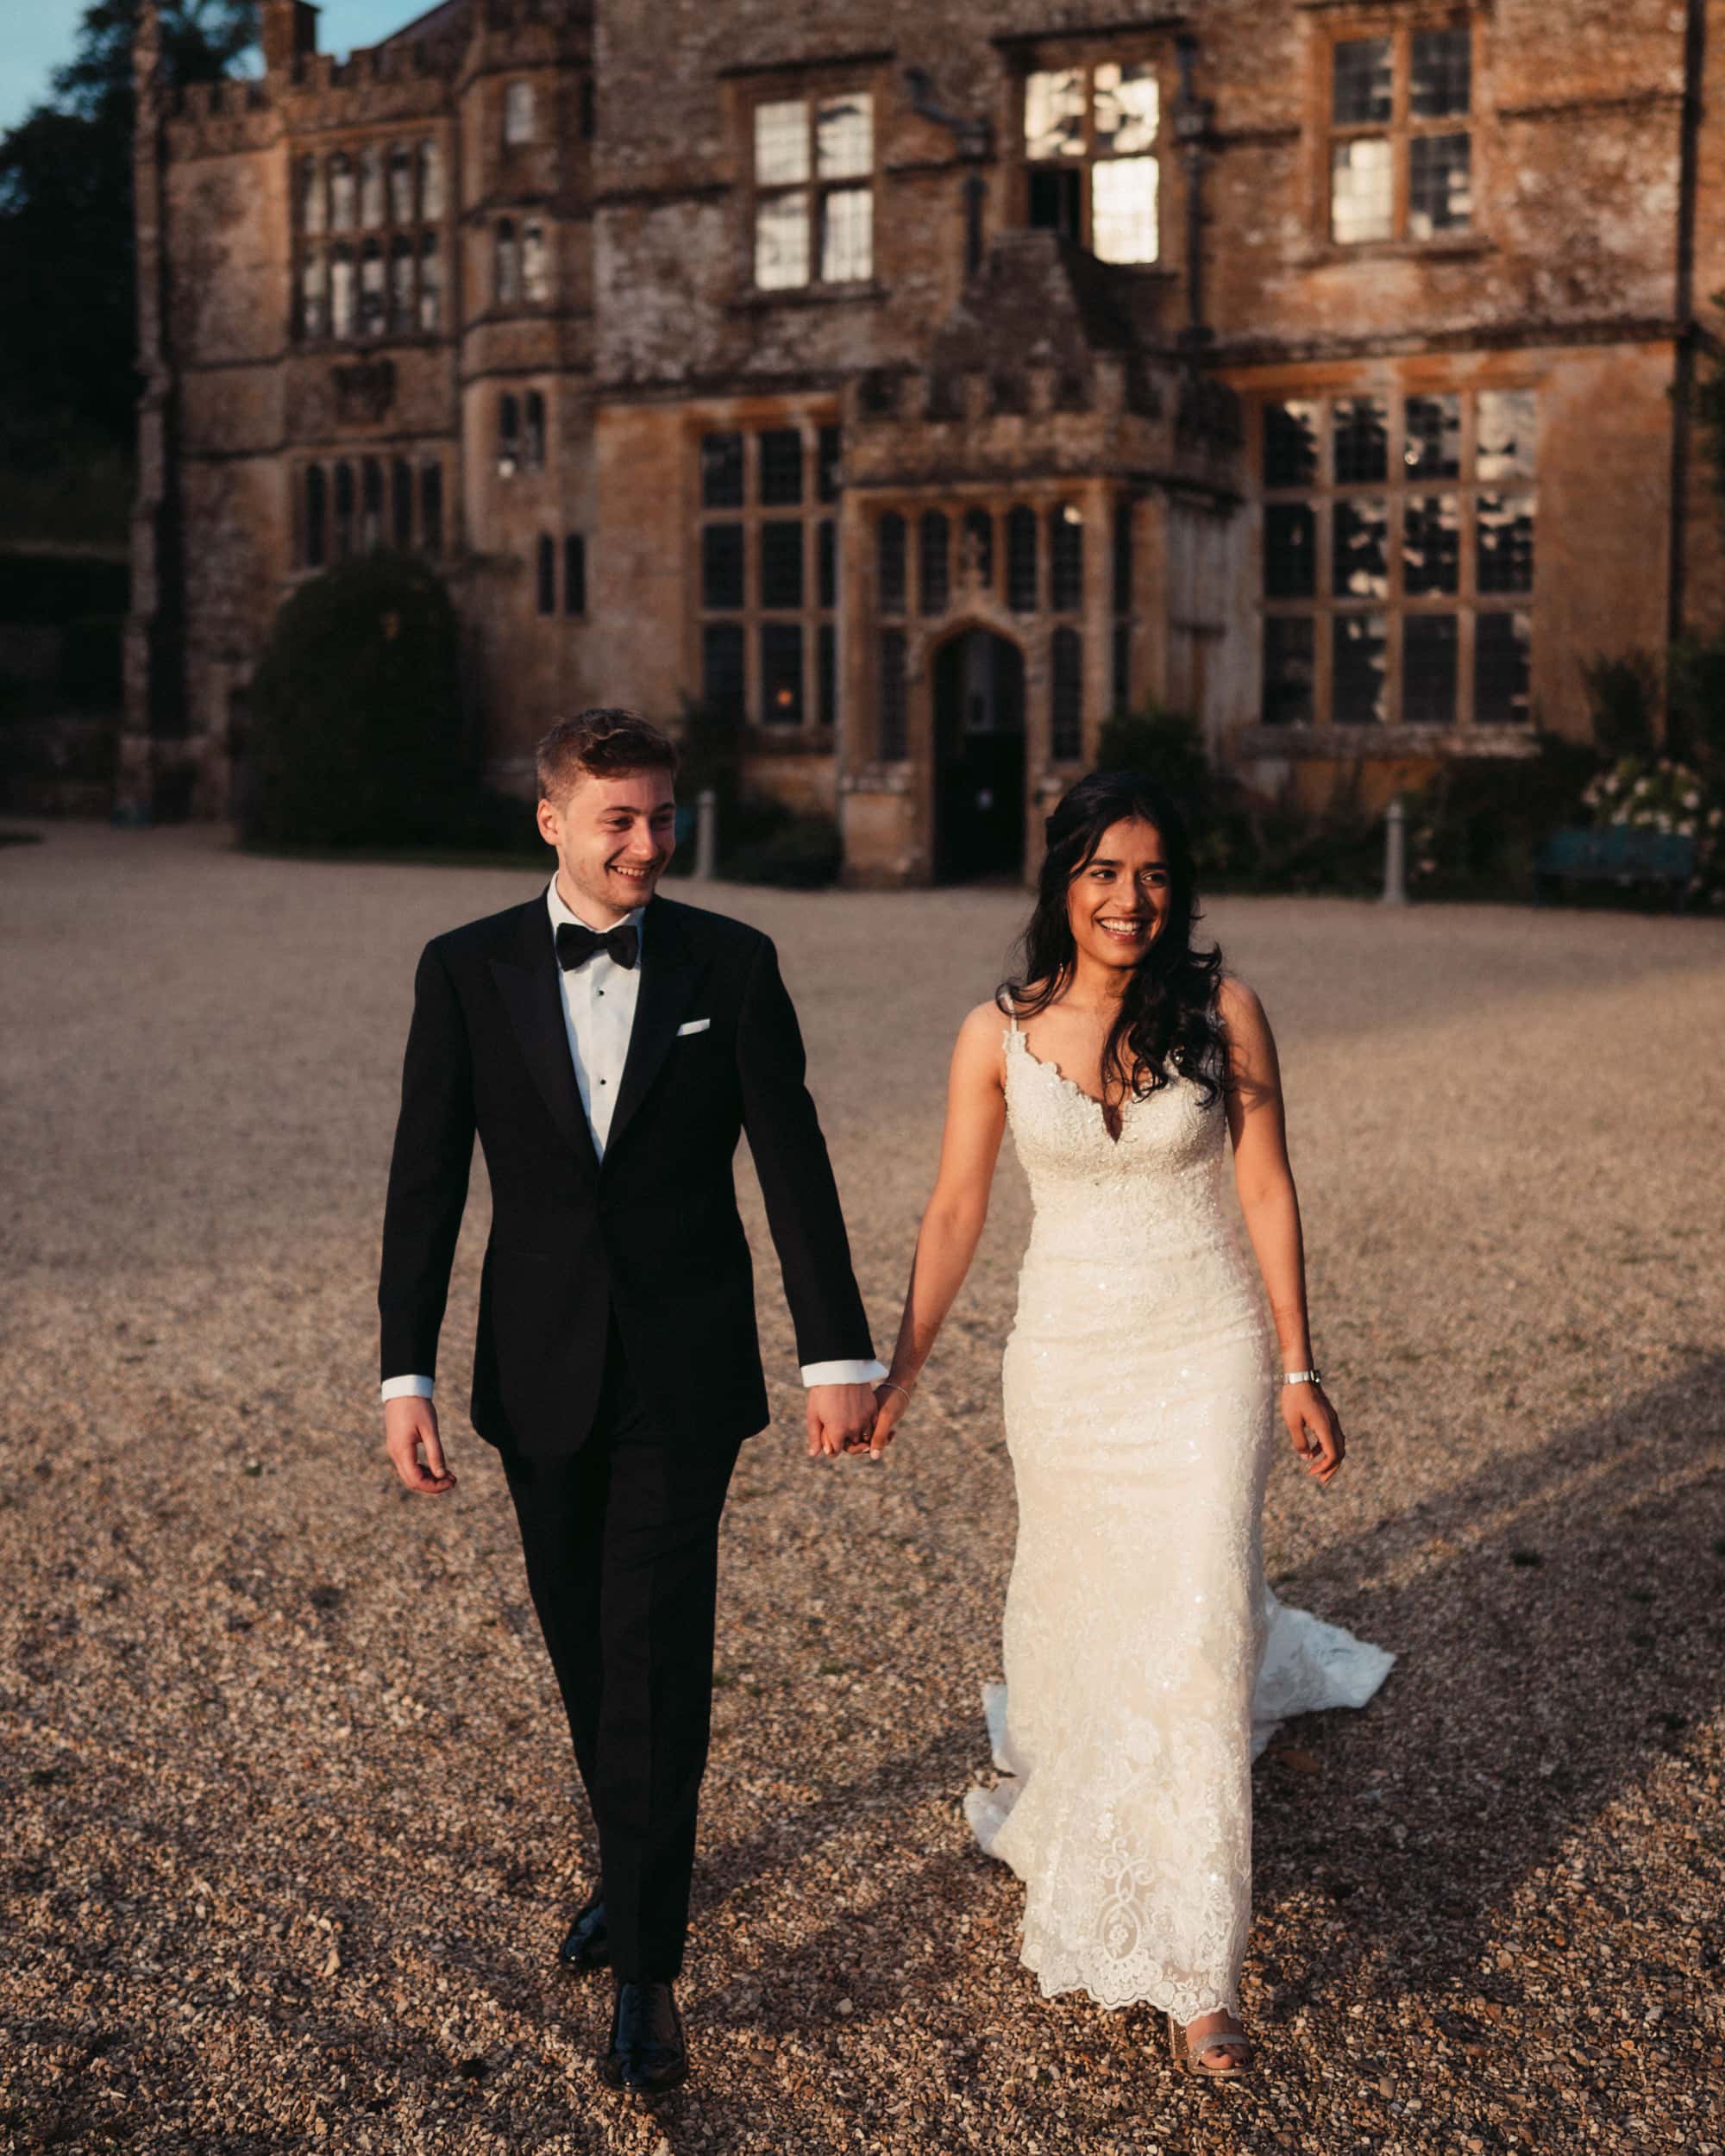 evening sunlight on newly bride and groom in Yeovil Somerset outside a grand house